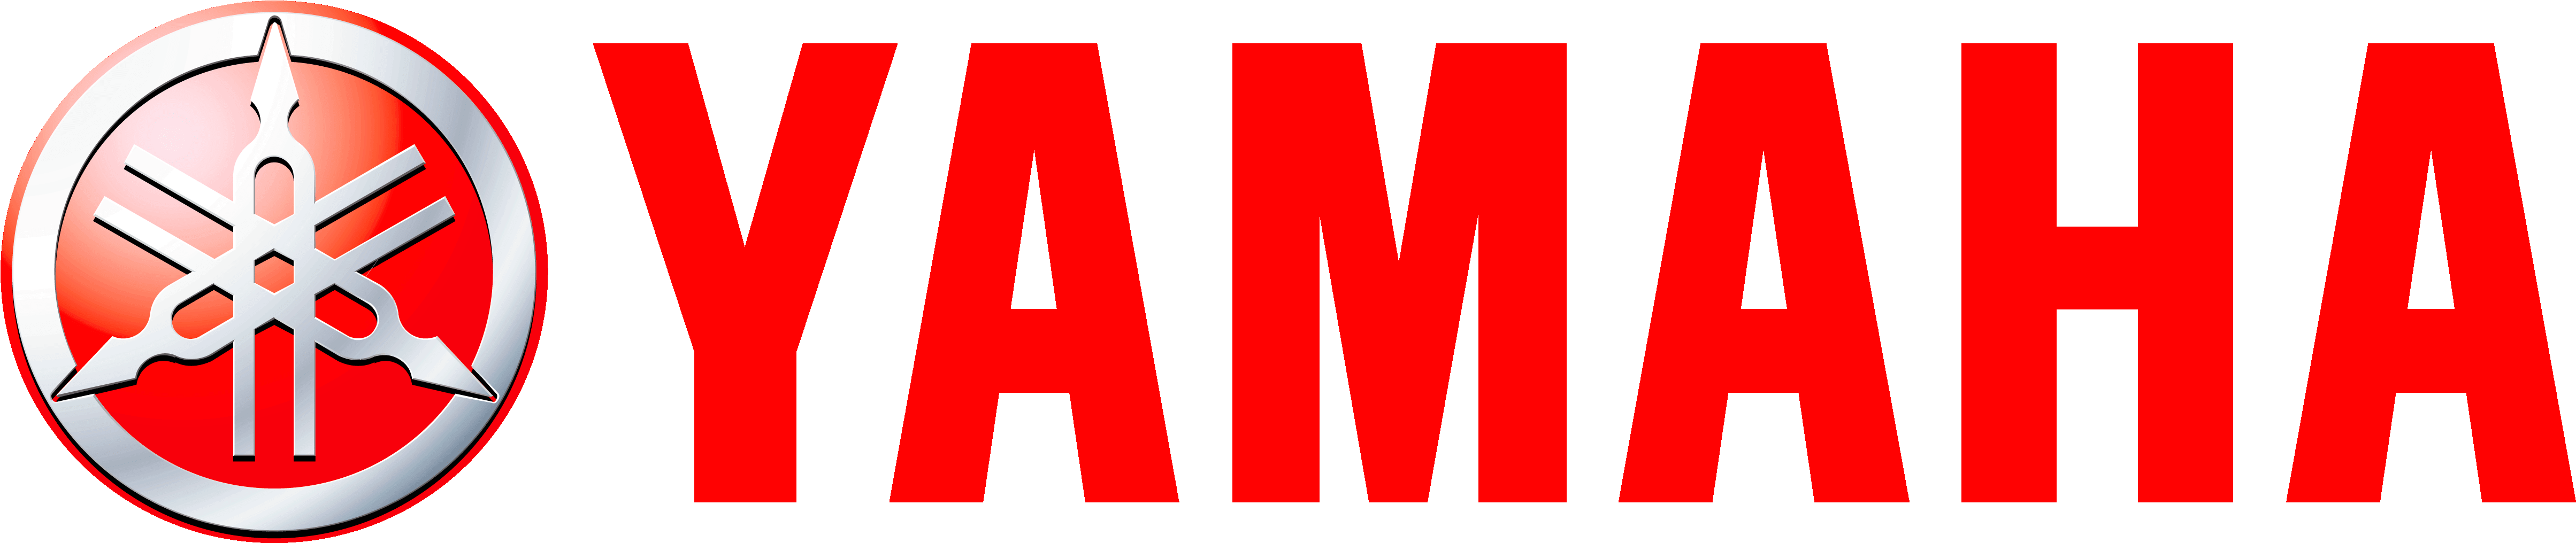 A Red Letters On A Black Background